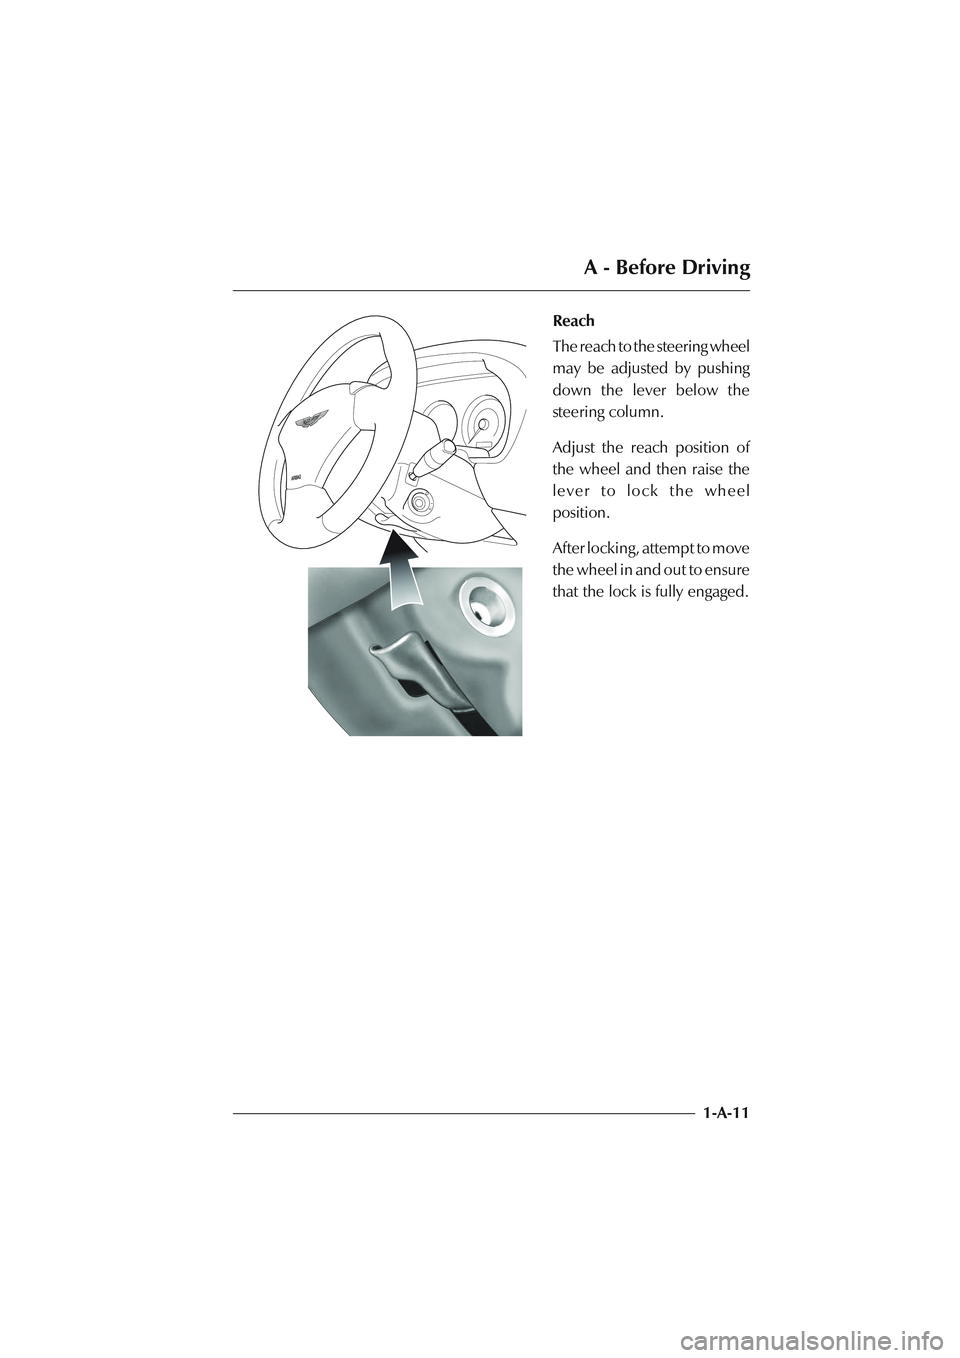 ASTON MARTIN DB AR1 Q 2003  Owners Guide A - Before Driving
1-A-11
Reach
The reach to the steering wheel
may be adjusted by pushing
down the lever below the
steering column.
Adjust the reach position of
the wheel and then raise the
lever to 